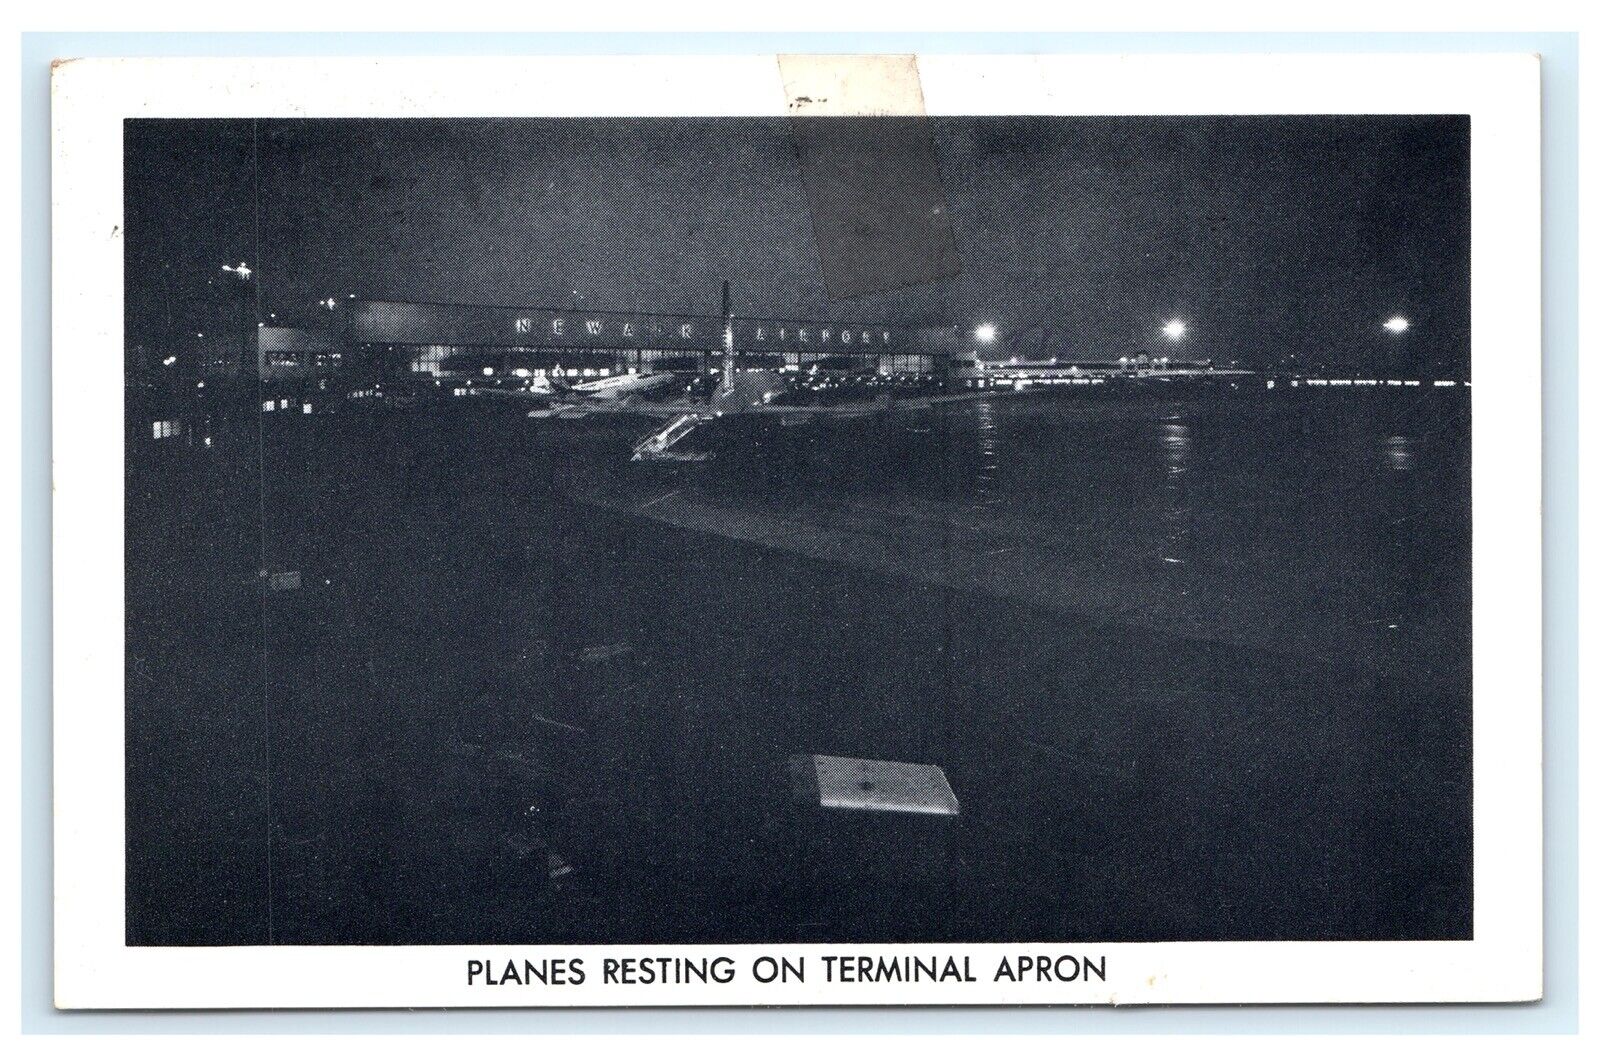 Planes Resting on Terminal Apron Newark Airport at Night 1968 NJ New Jersey A7